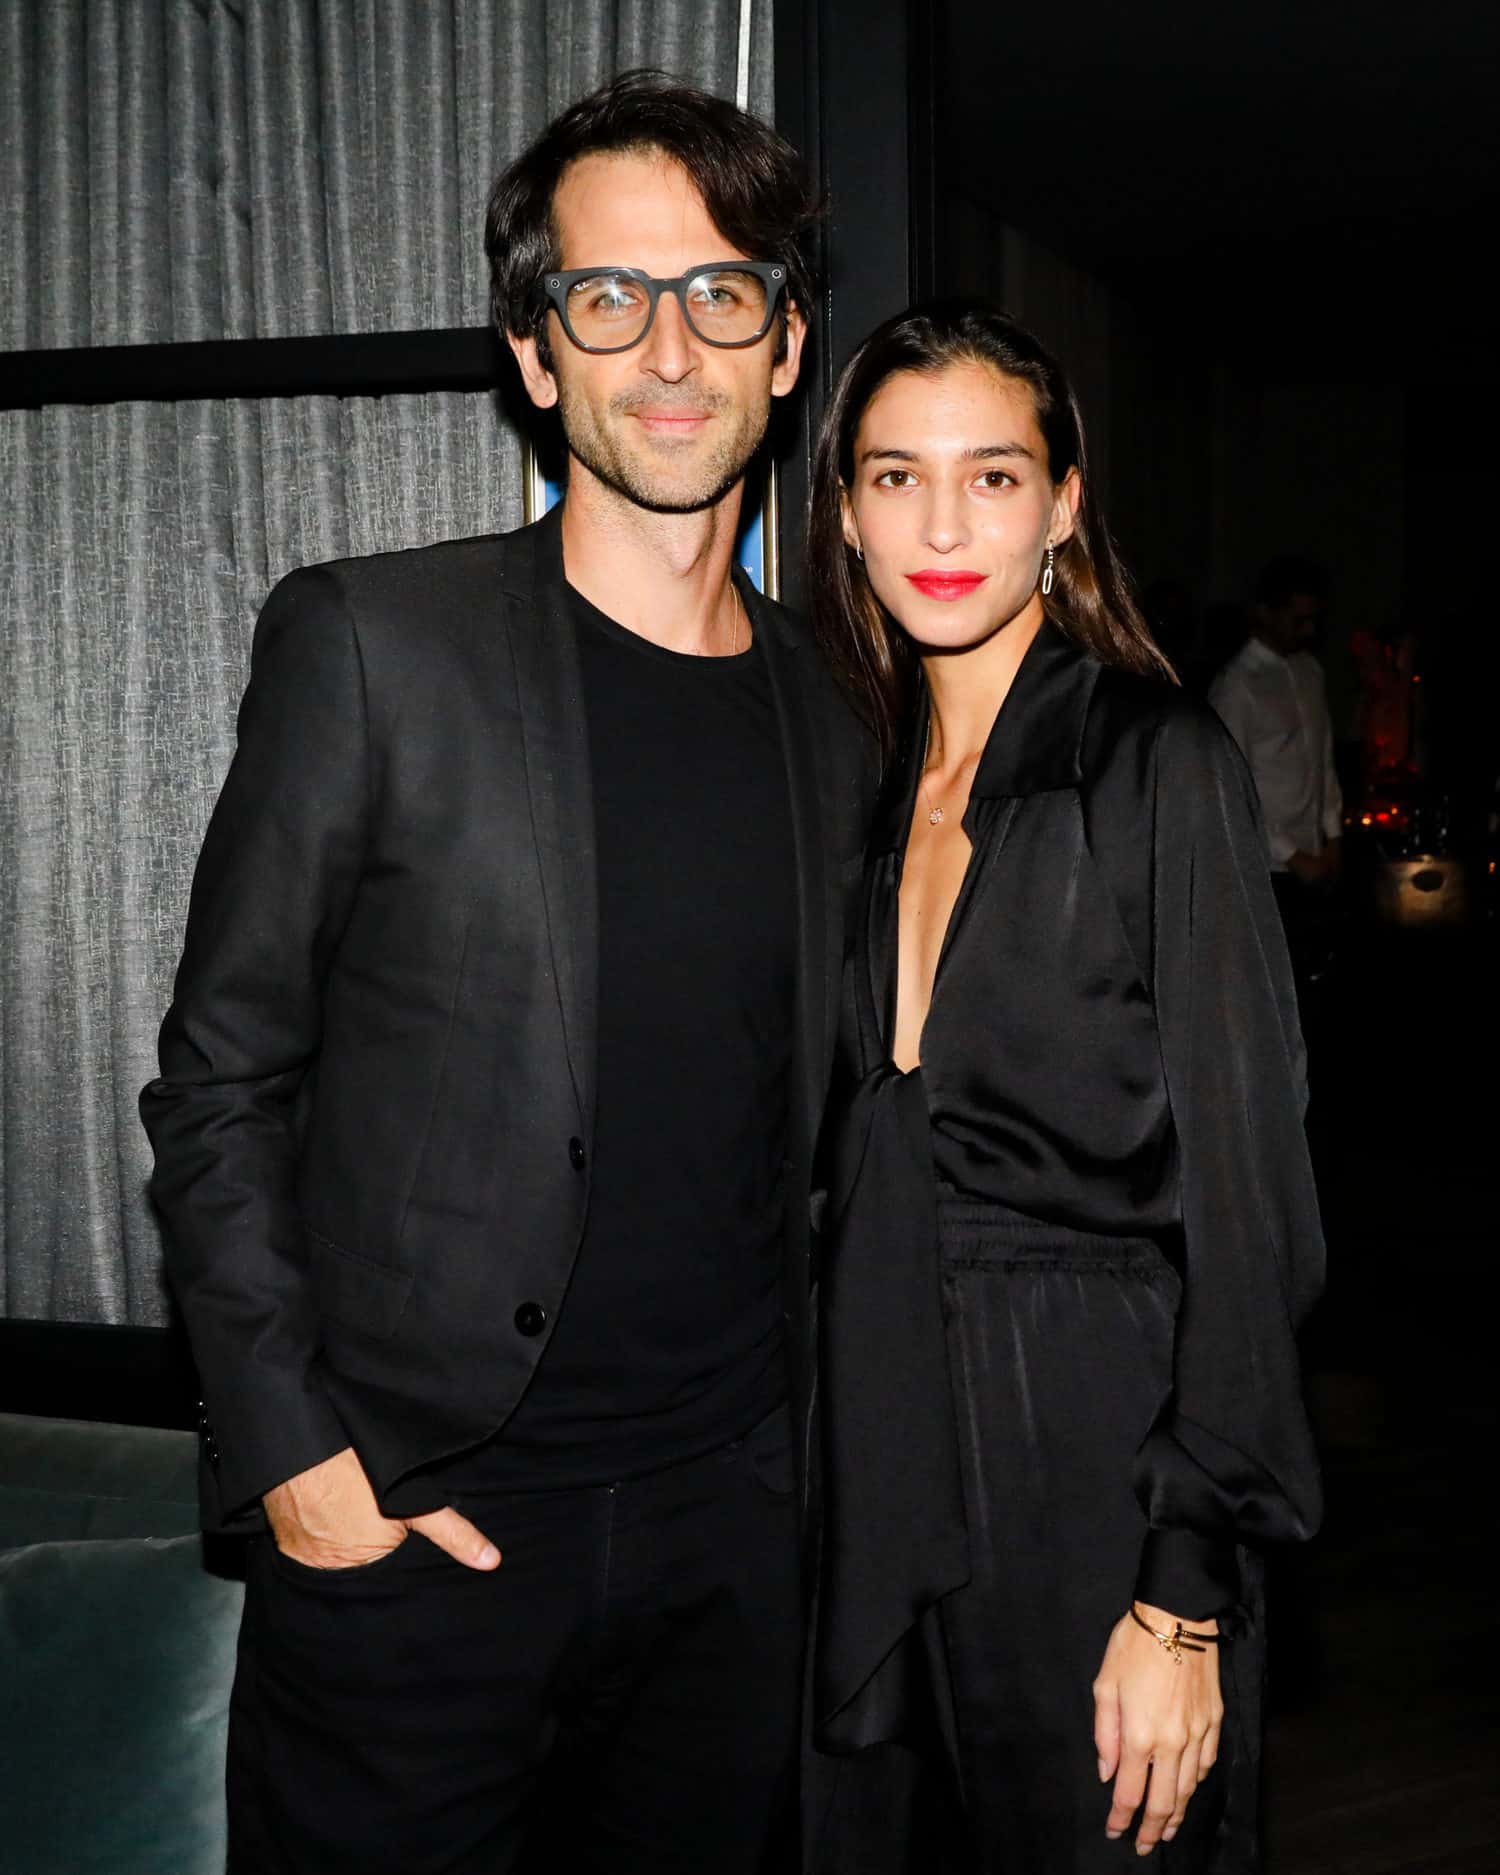 Daily Events Diary: amfAR Los Angeles, An Art Unveiling At The Seville,  Pritika Swarup's Diwali Celebration, Out To Dinner With Cult Gaia, Anine  Bing, Laura Ashley x Batsheva, And More! - Daily